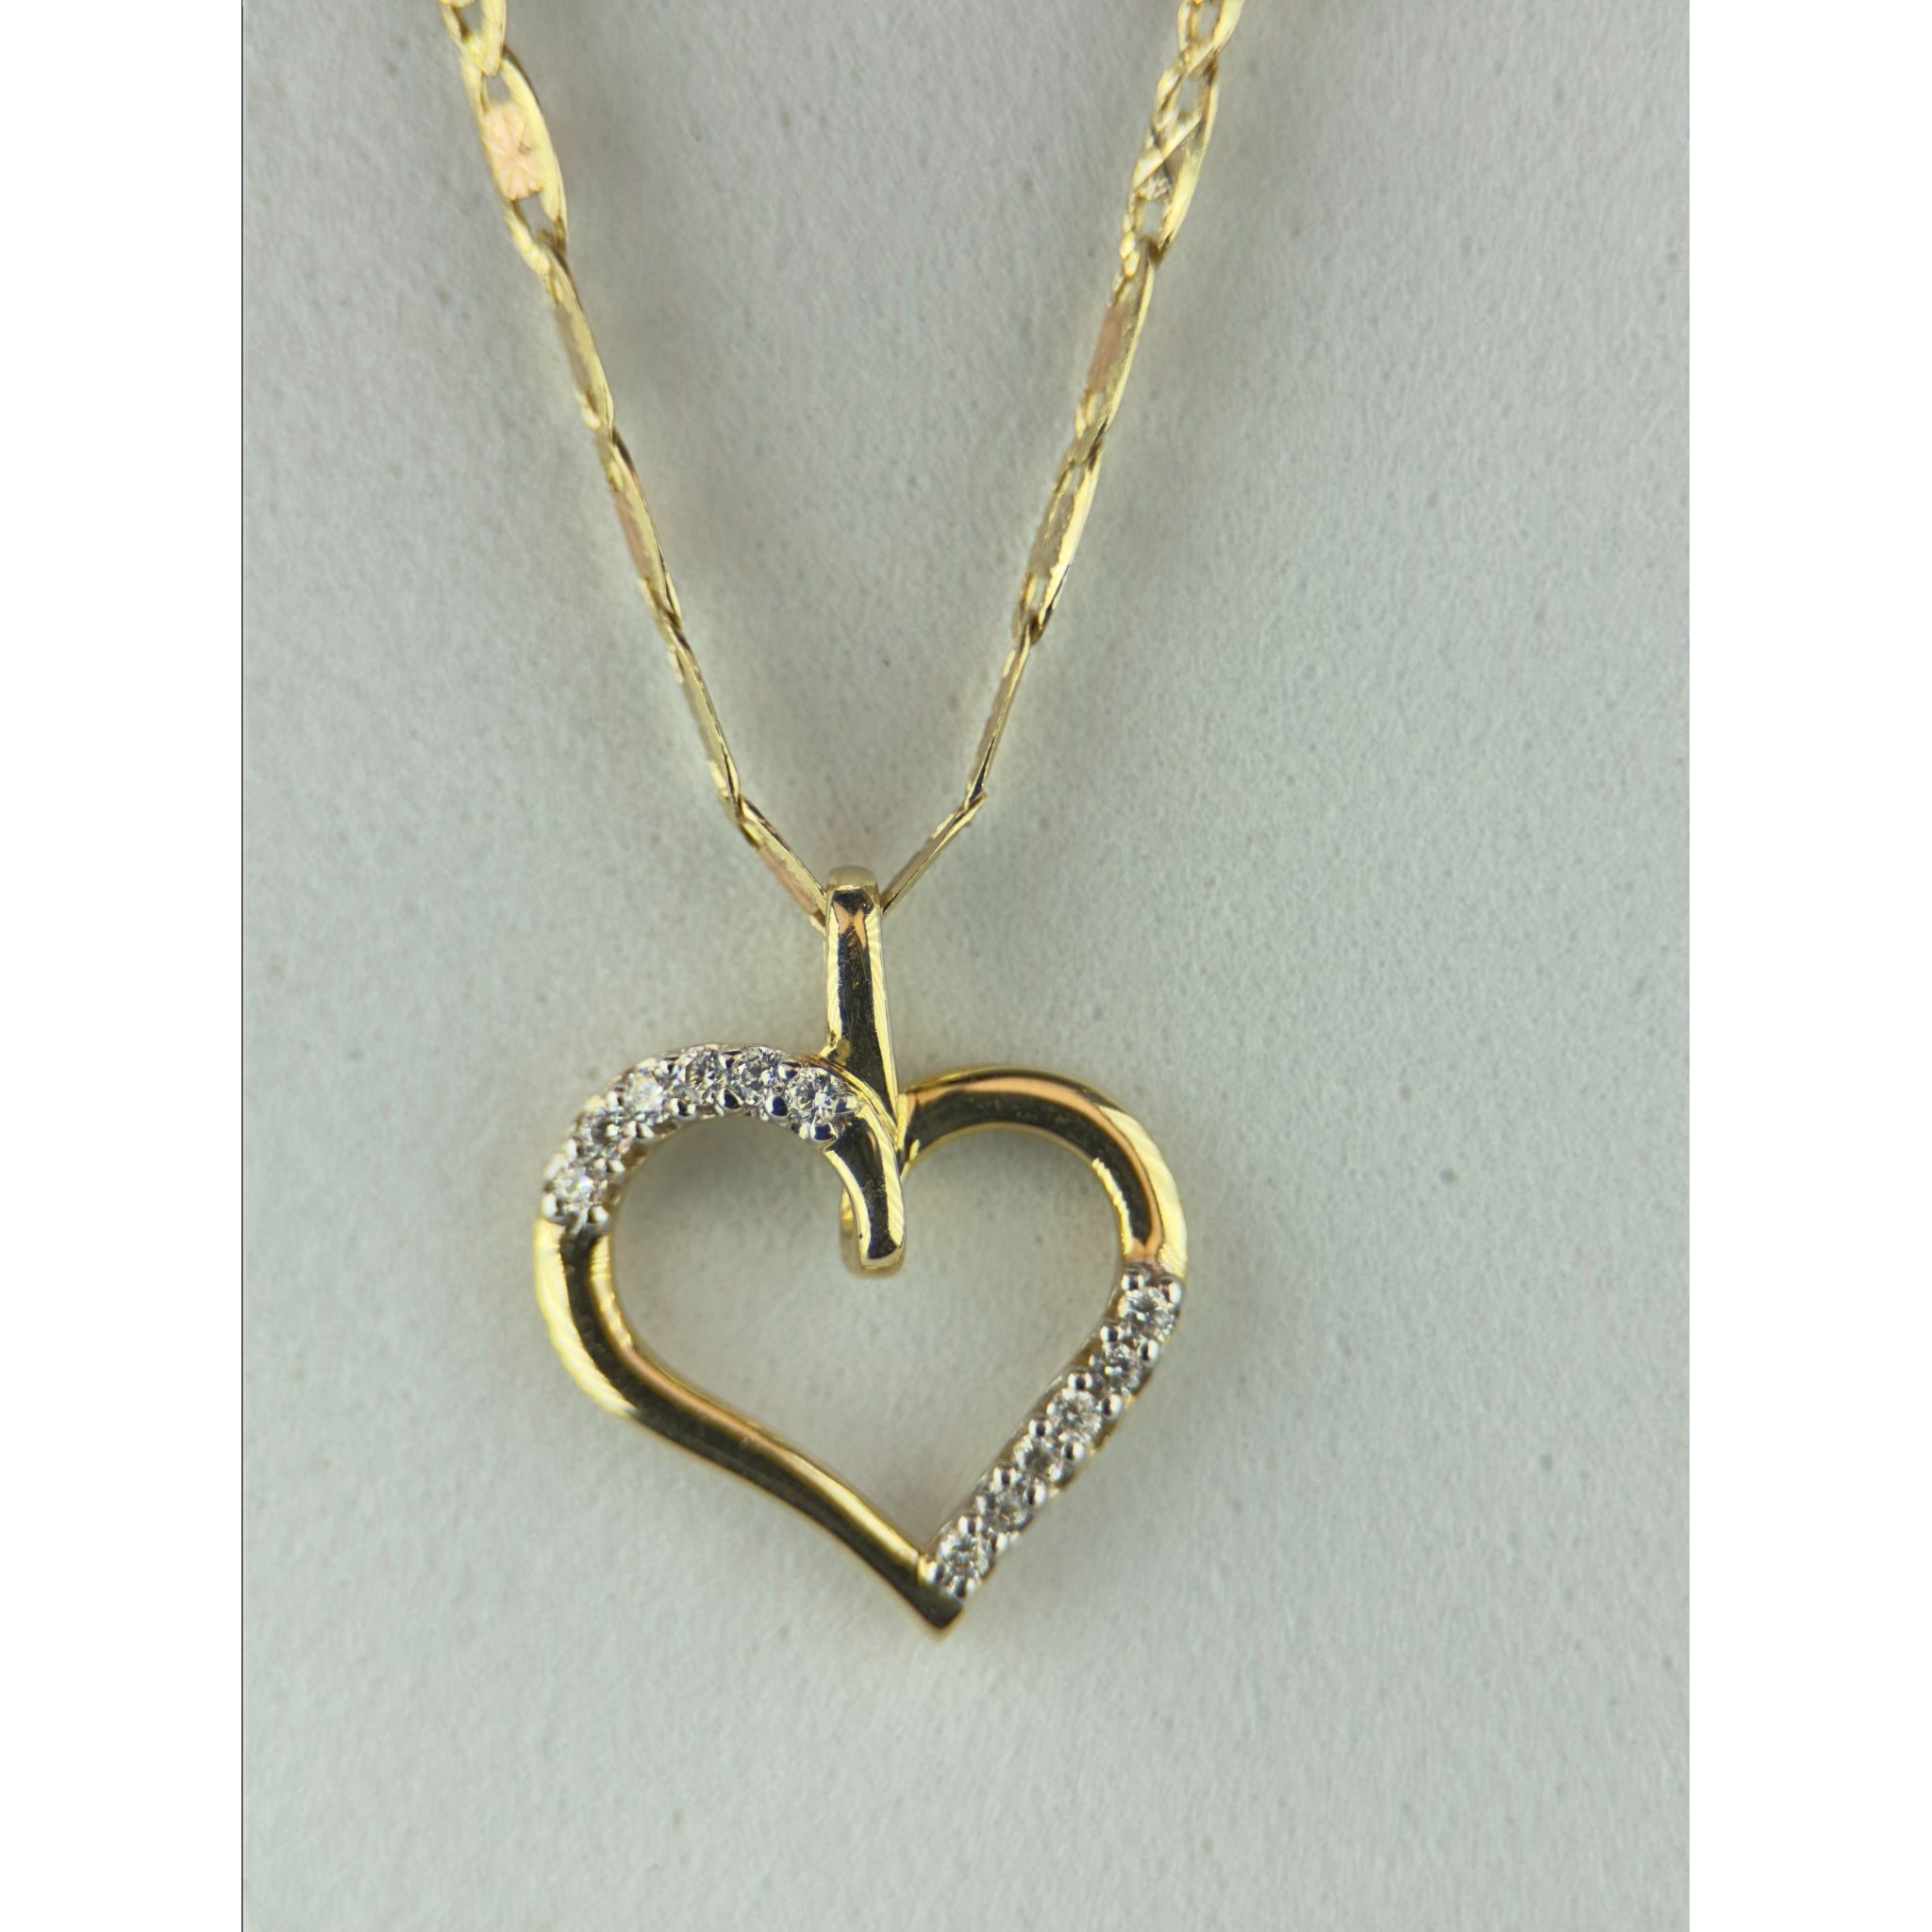 DR2208 - 14K Yellow Gold - Diamond - Pendant and Chain